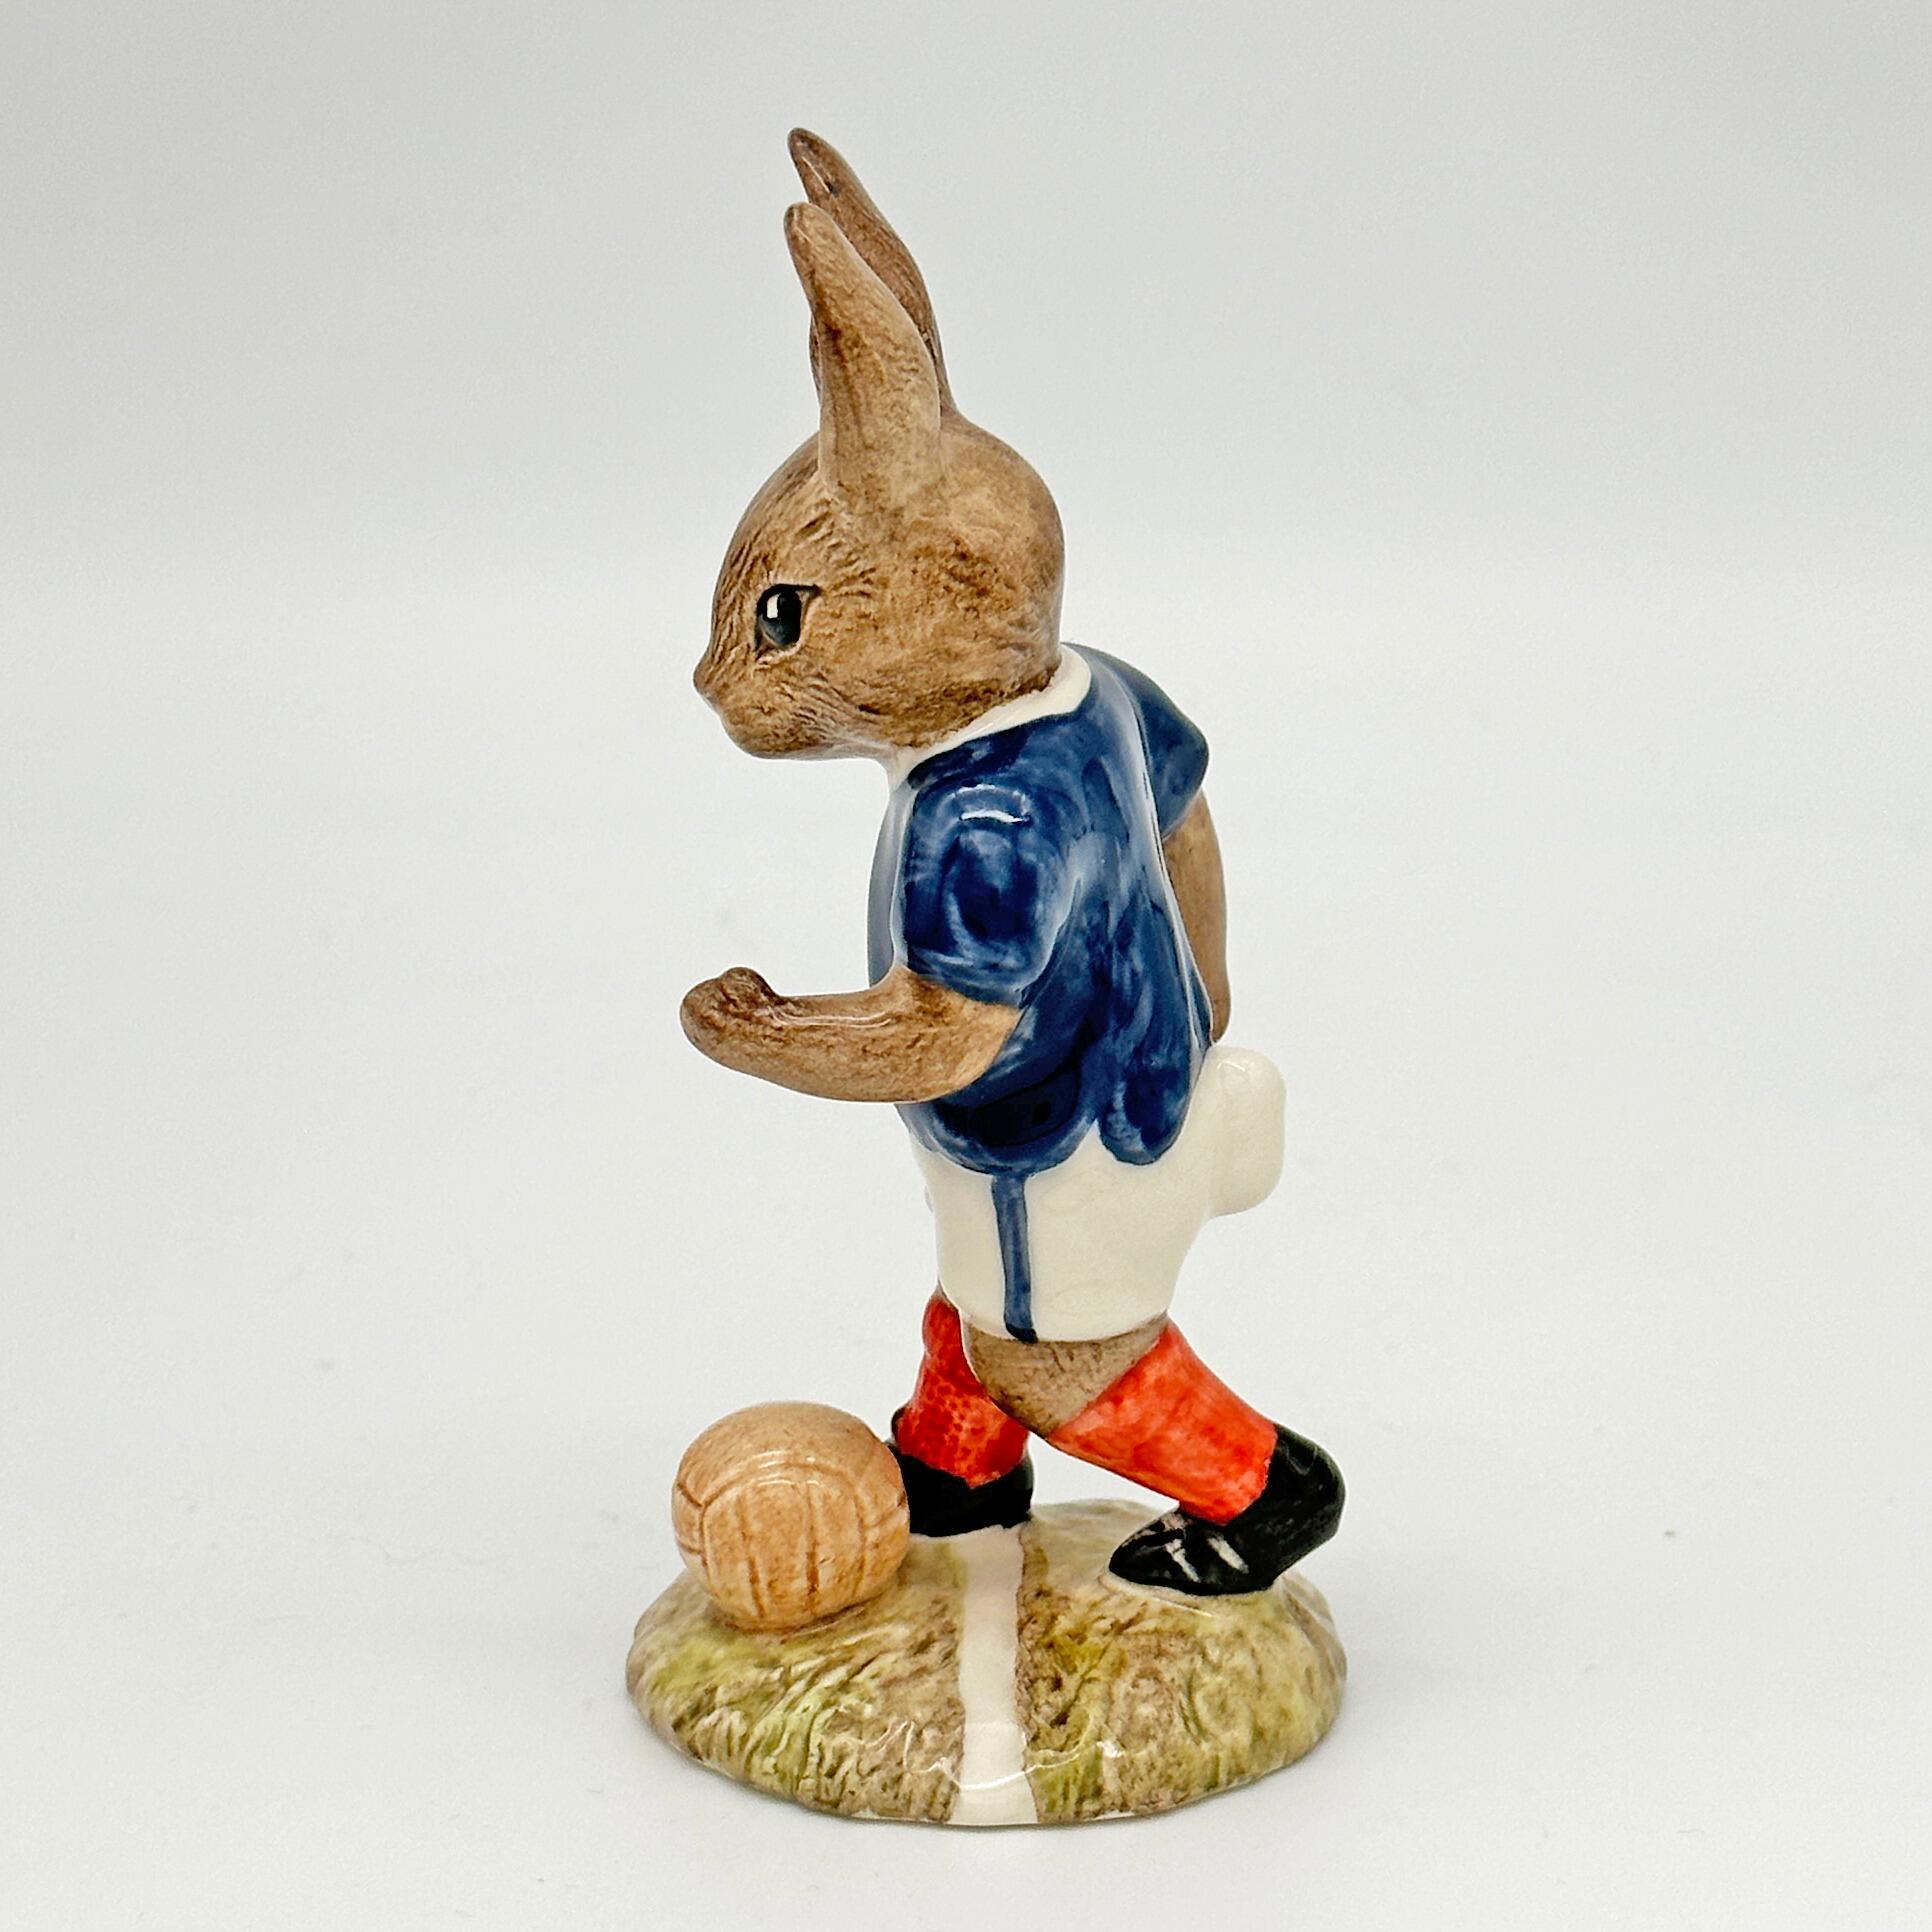 Royal Doulton Bunnykins figure - DB123 Soccer Playerin Blue and White - left